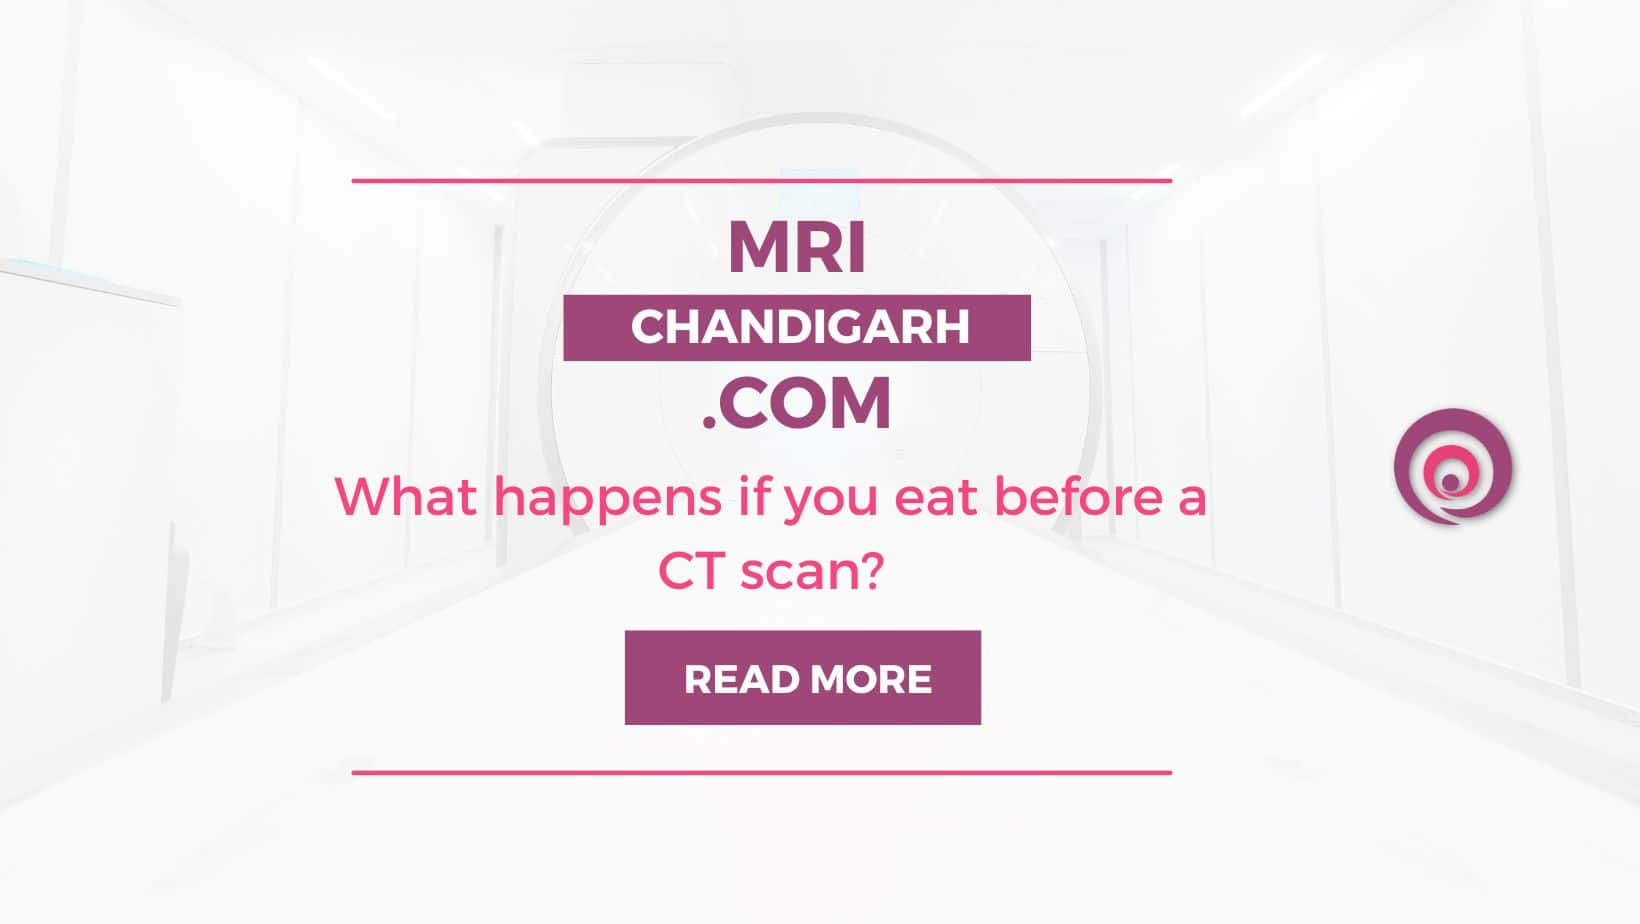 What happens if you eat before a CT scan?